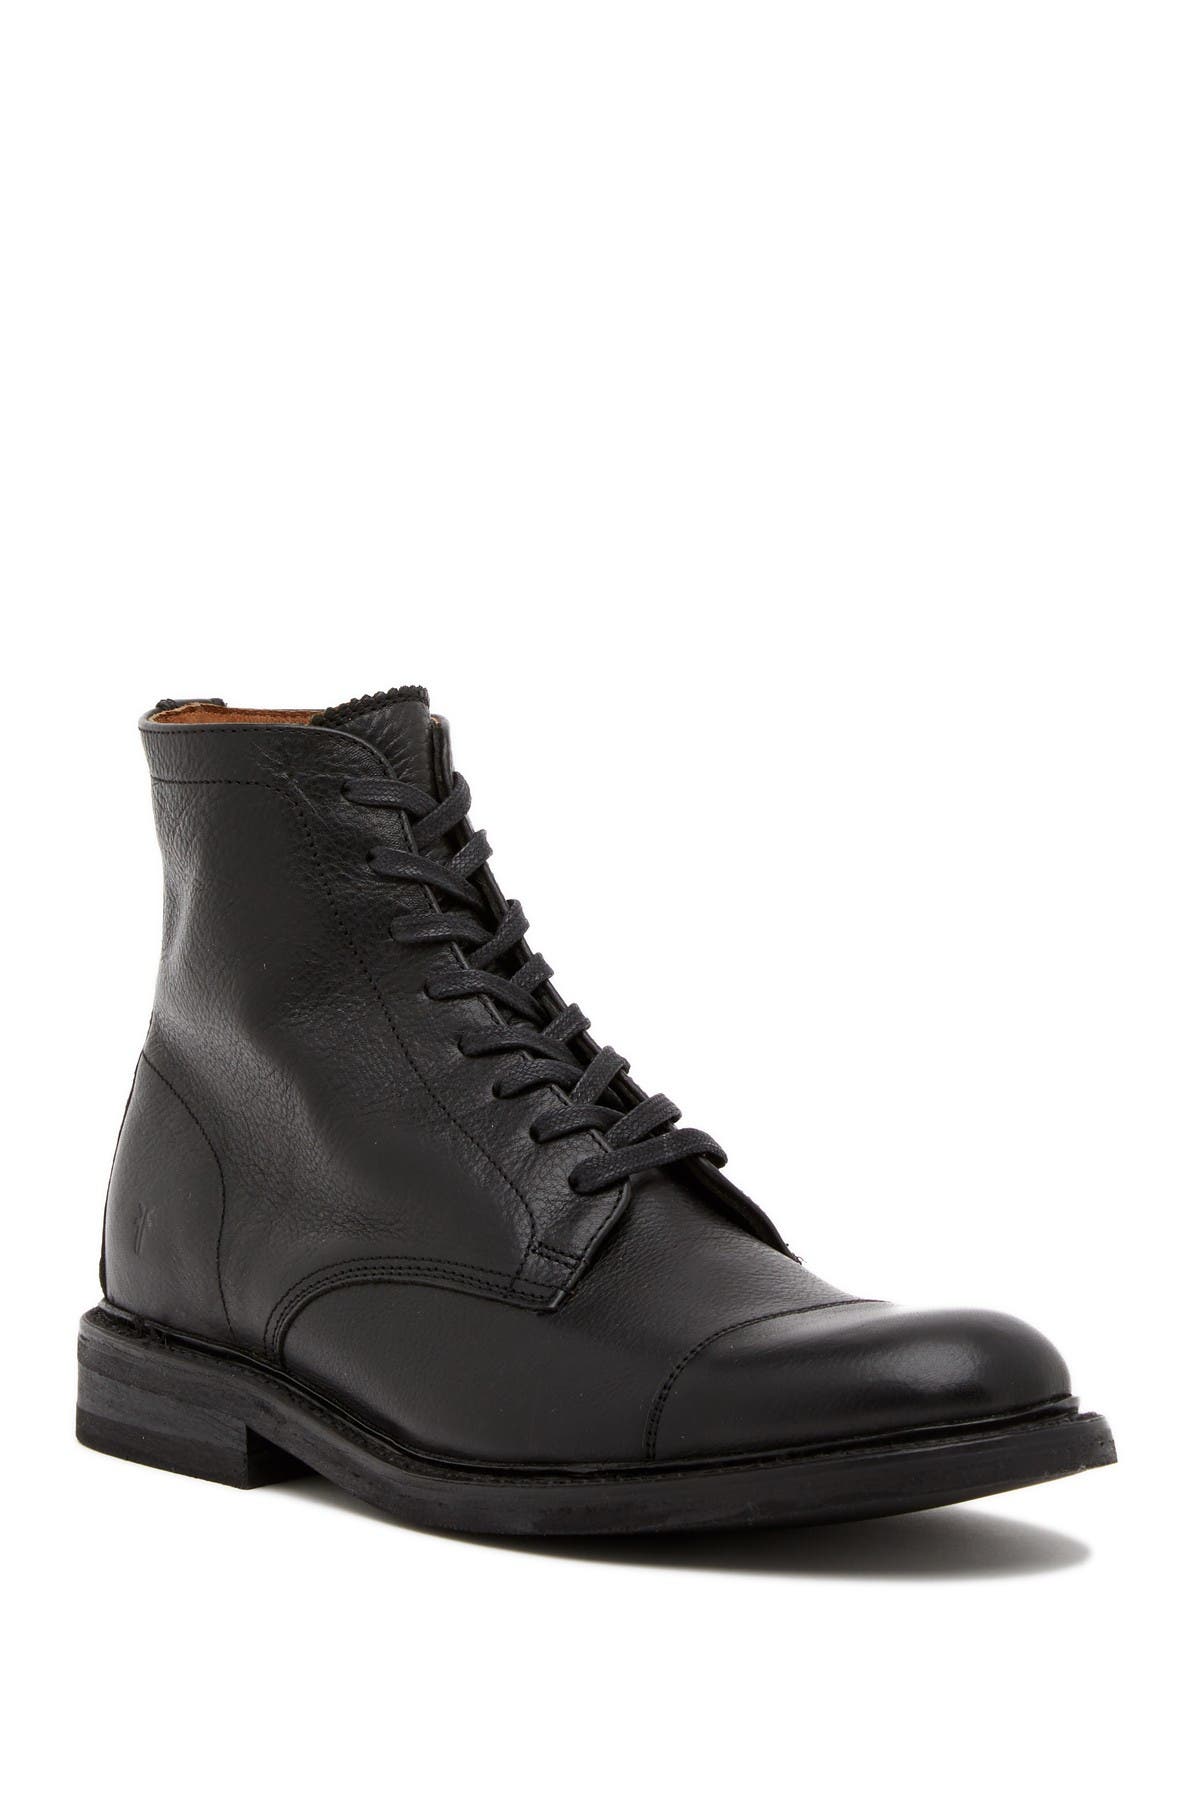 Frye | Seth Leather Lace-Up Boot 